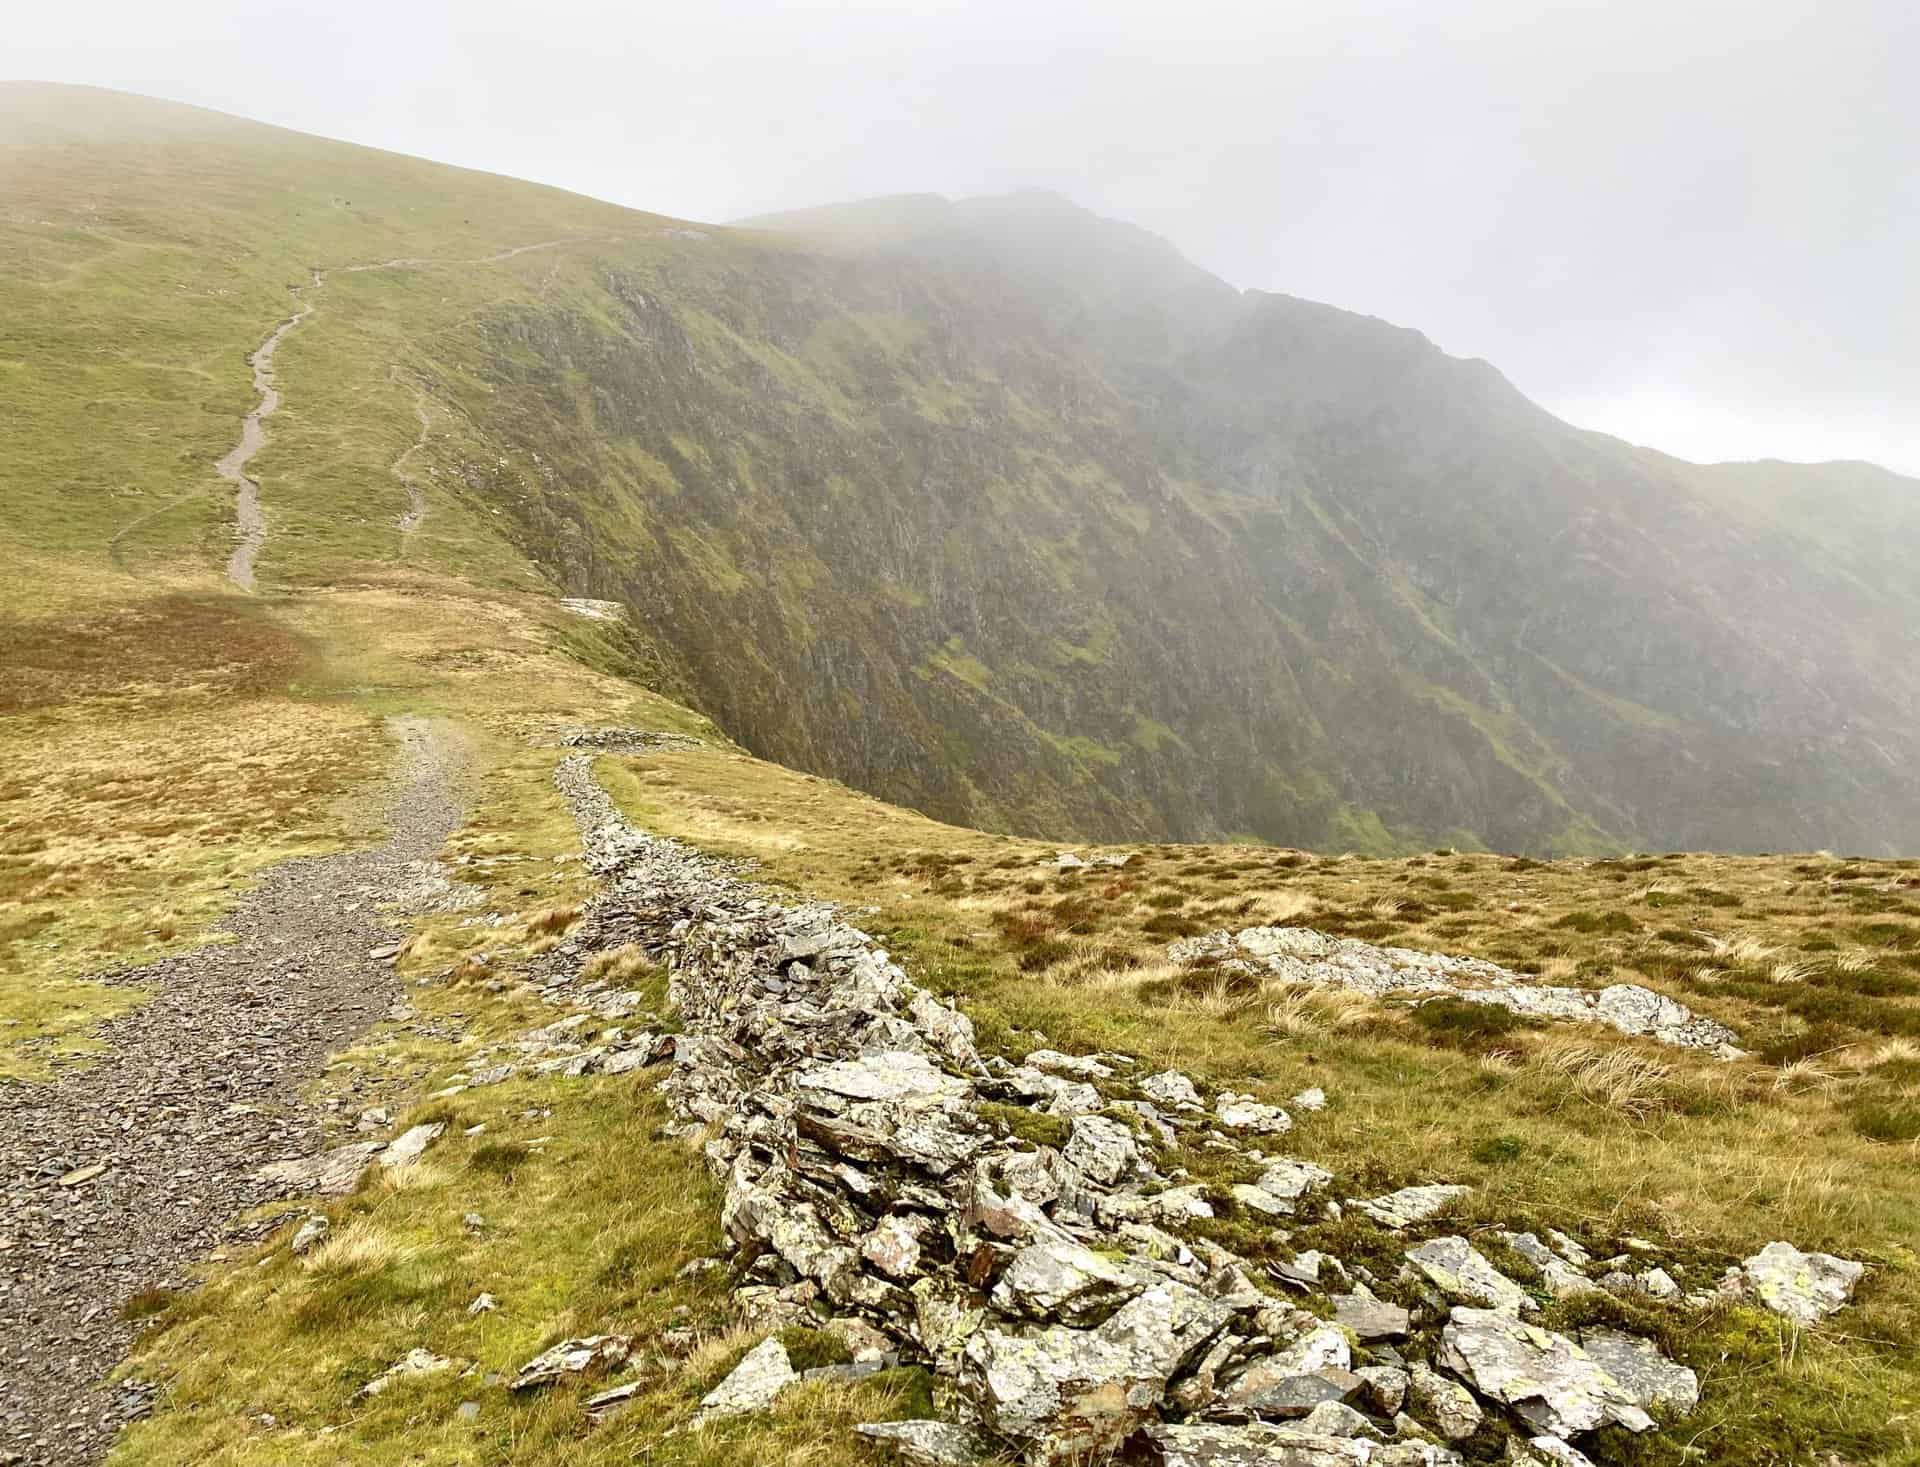 The rocky slopes of Hobcarton Crag and the path leading to Hopegill Head.